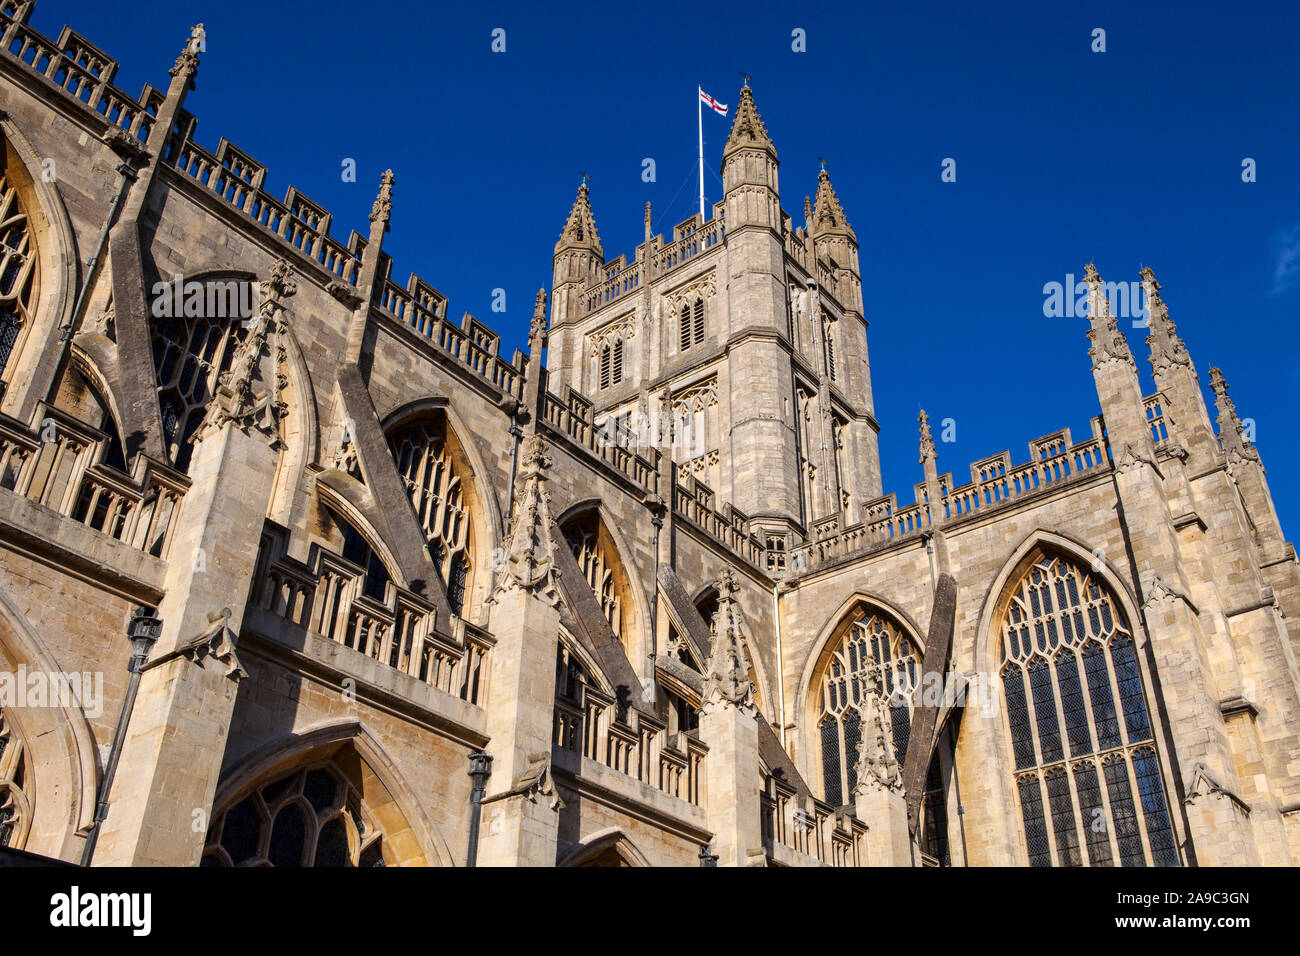 A view of the magnificent Bath Abbey in the historic city of Bath in Somerset, UK. Stock Photo